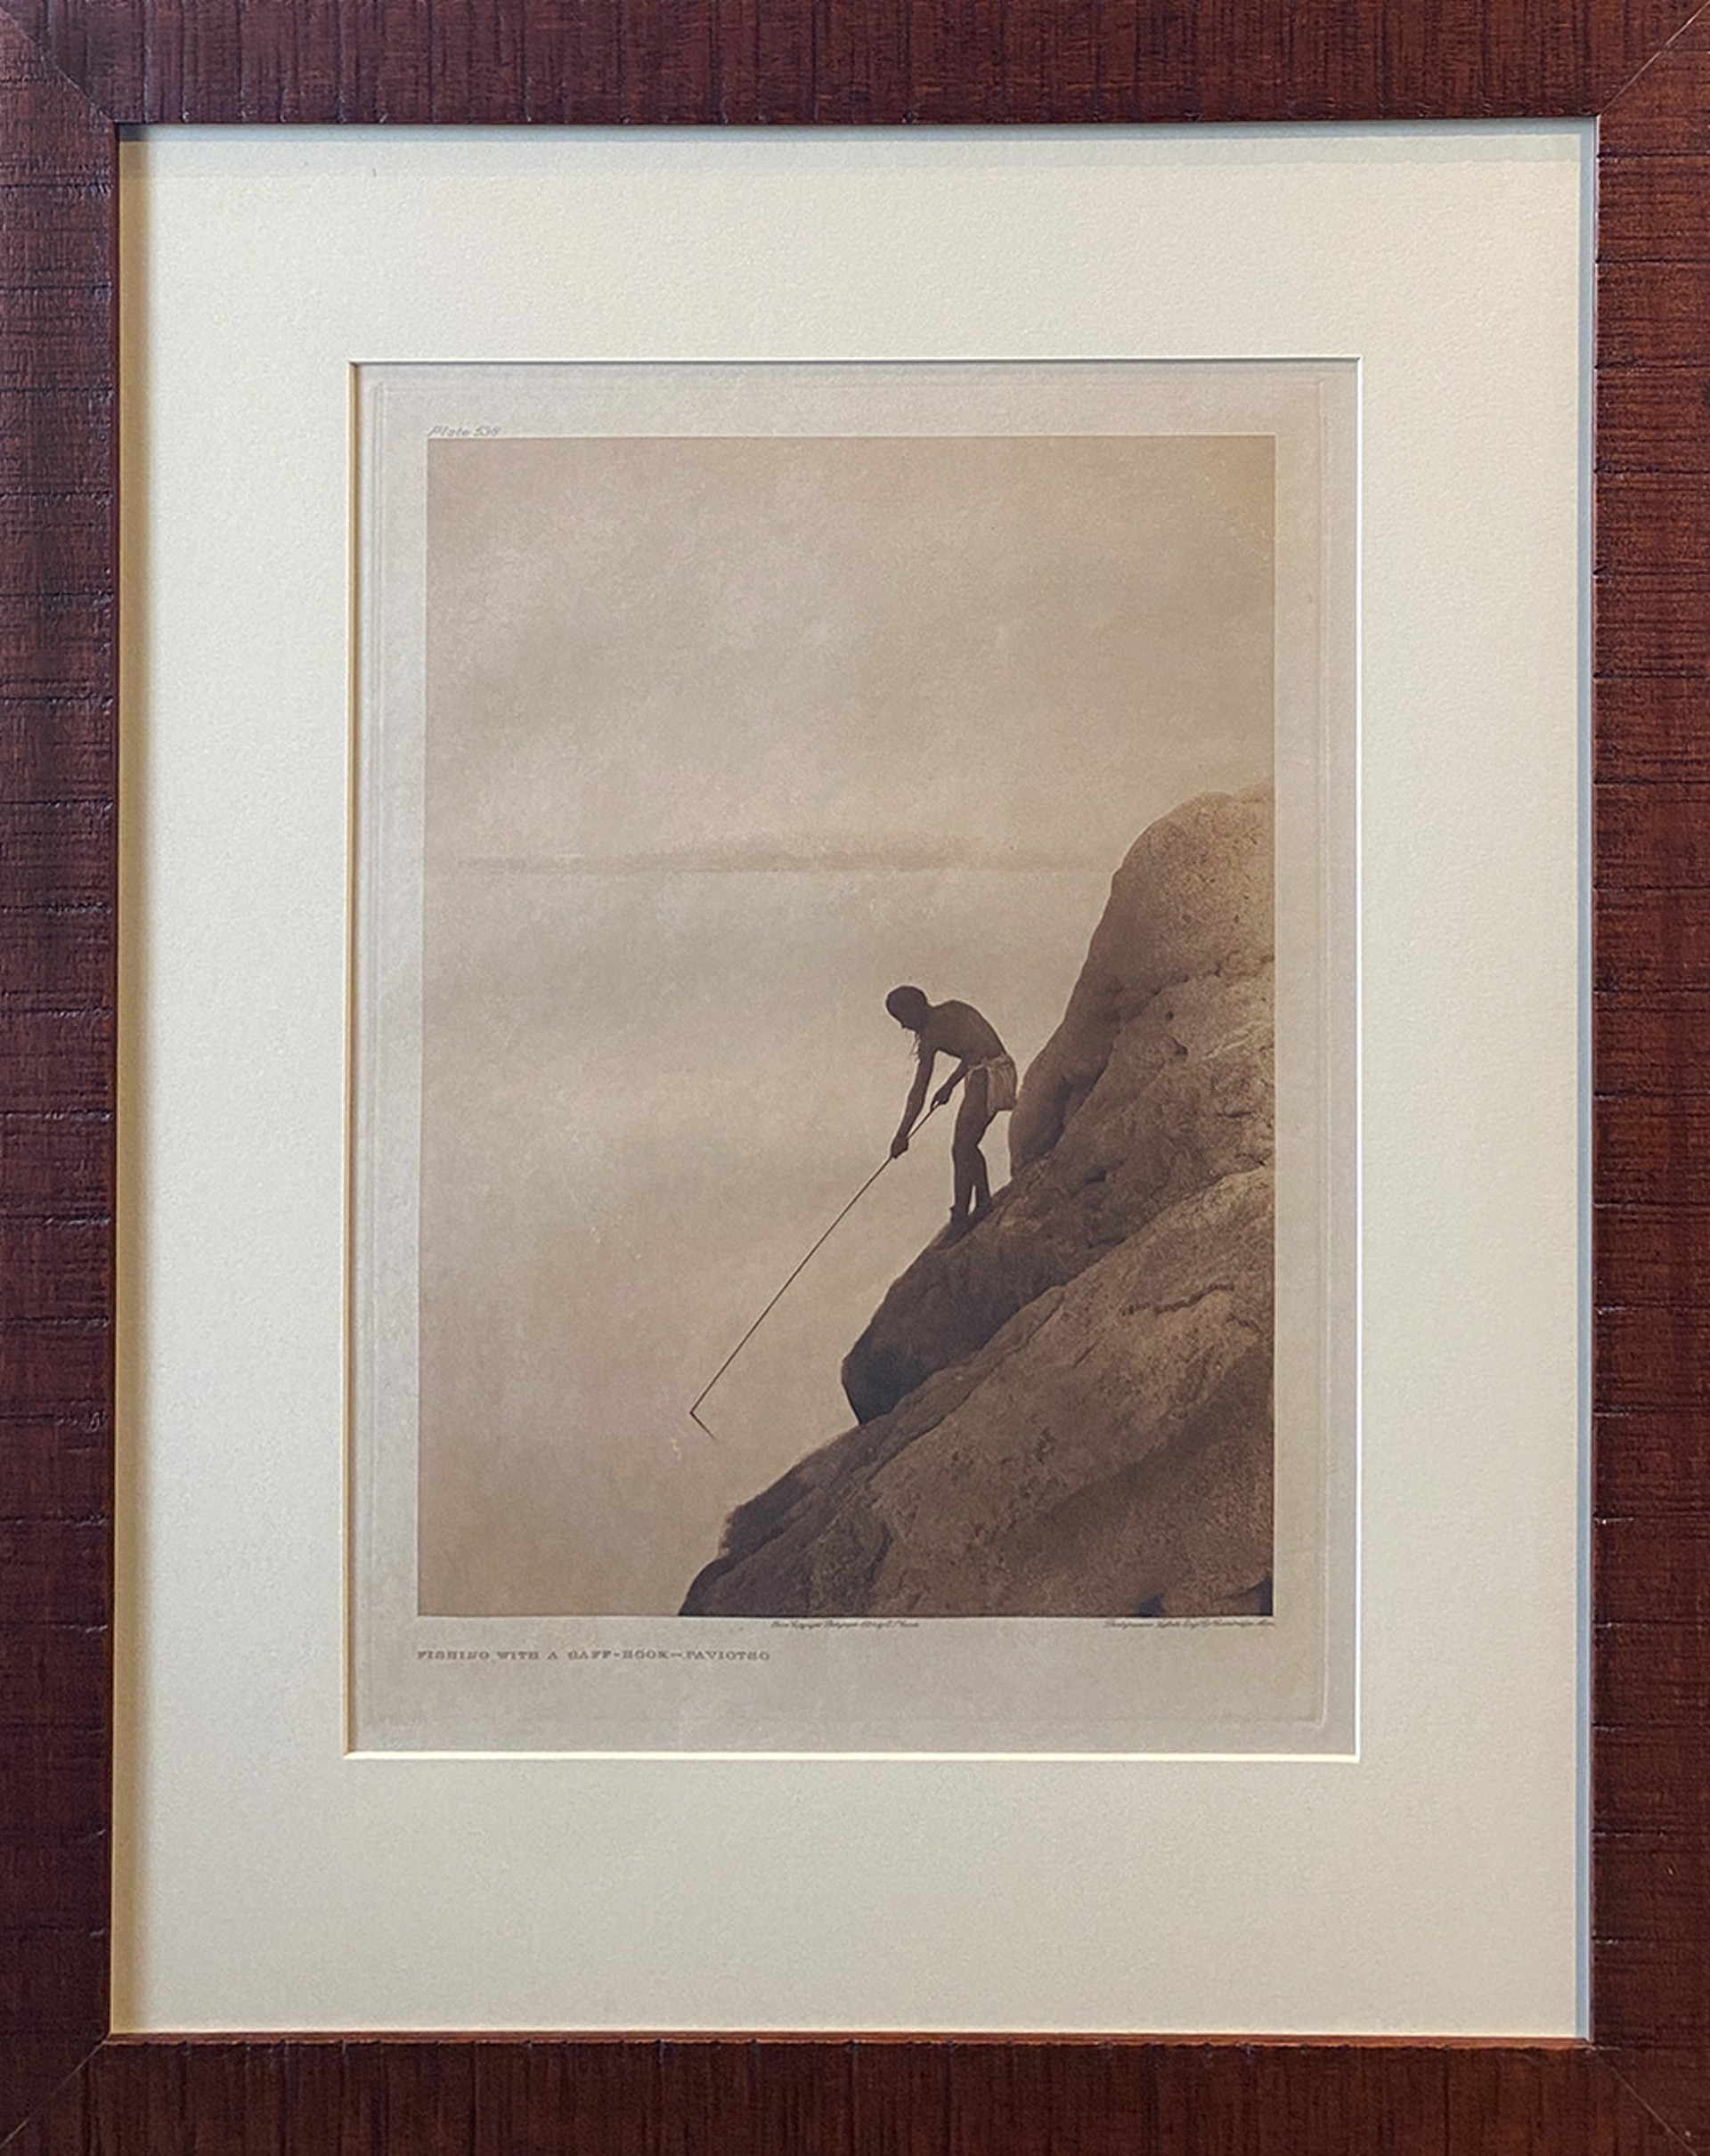 Fishing with a Graff-Hook-Paviotso, plate #538 by Edward S Curtis